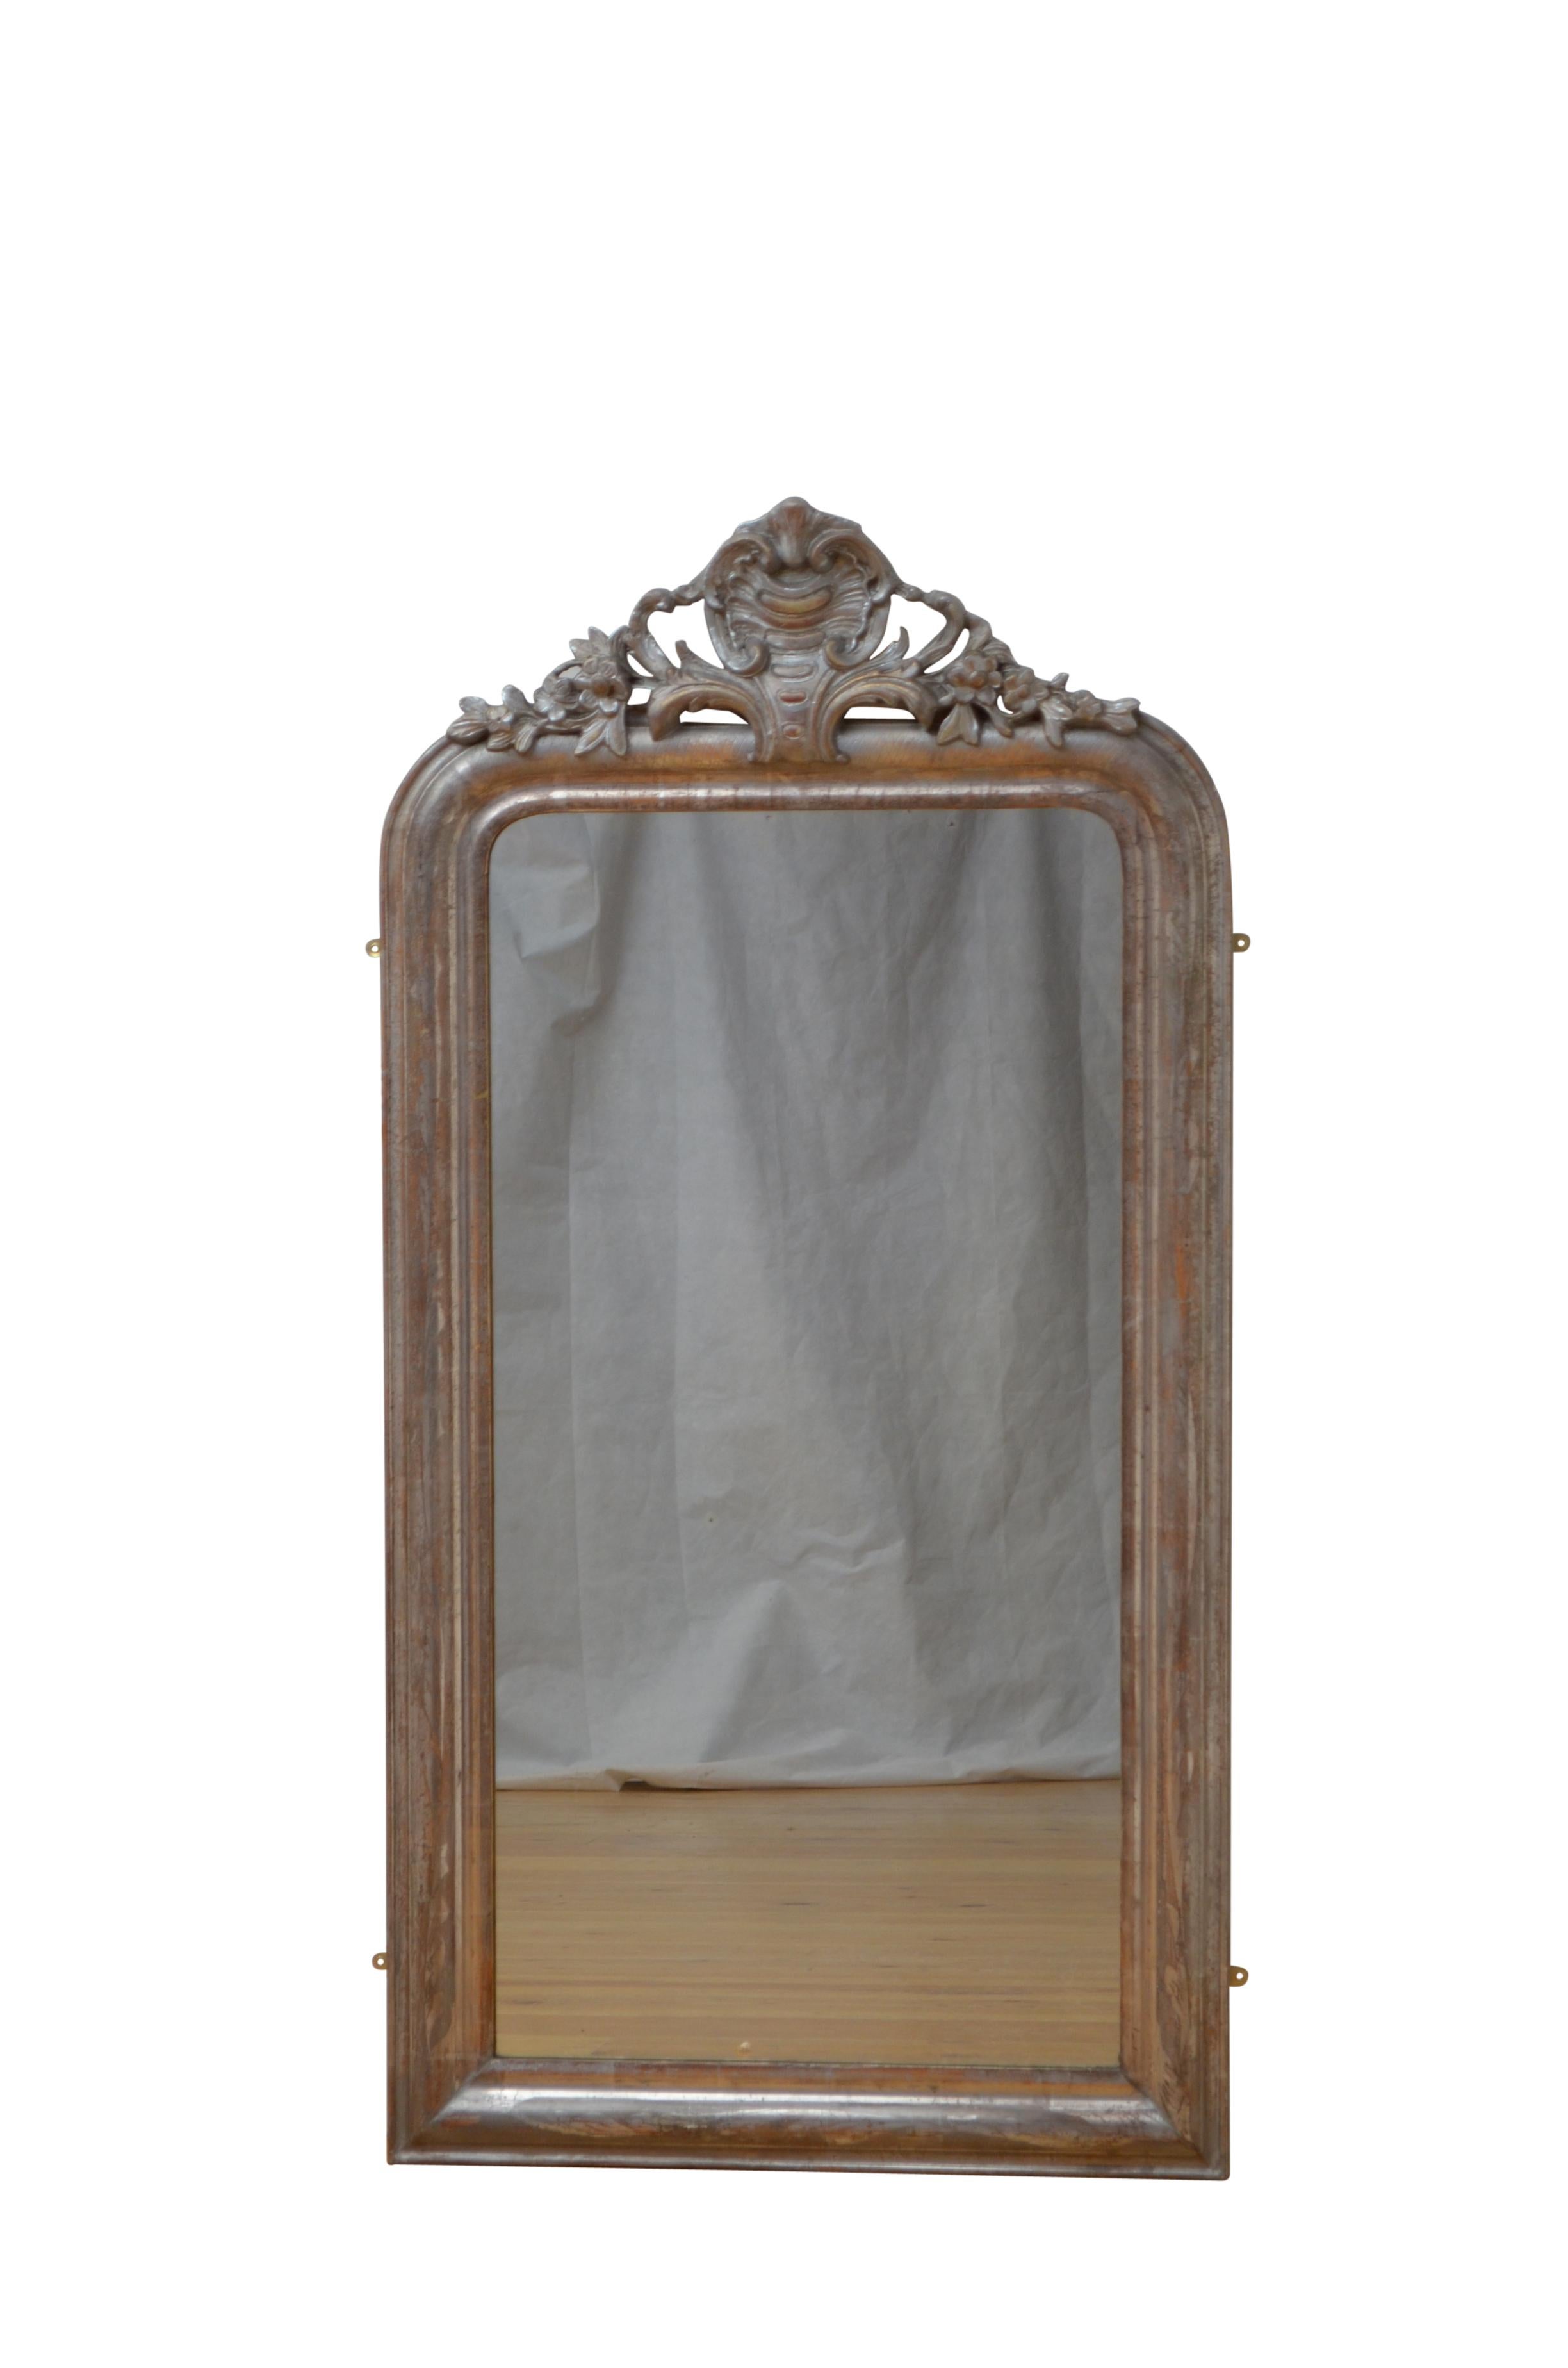 K0562 Rare XIXth century wall mirror, having original glass with minor foxing and moulded silver frame with engrave flower motifs and foliage crest to the centre. This antique mirror retains its original glass, original silvering with some touching